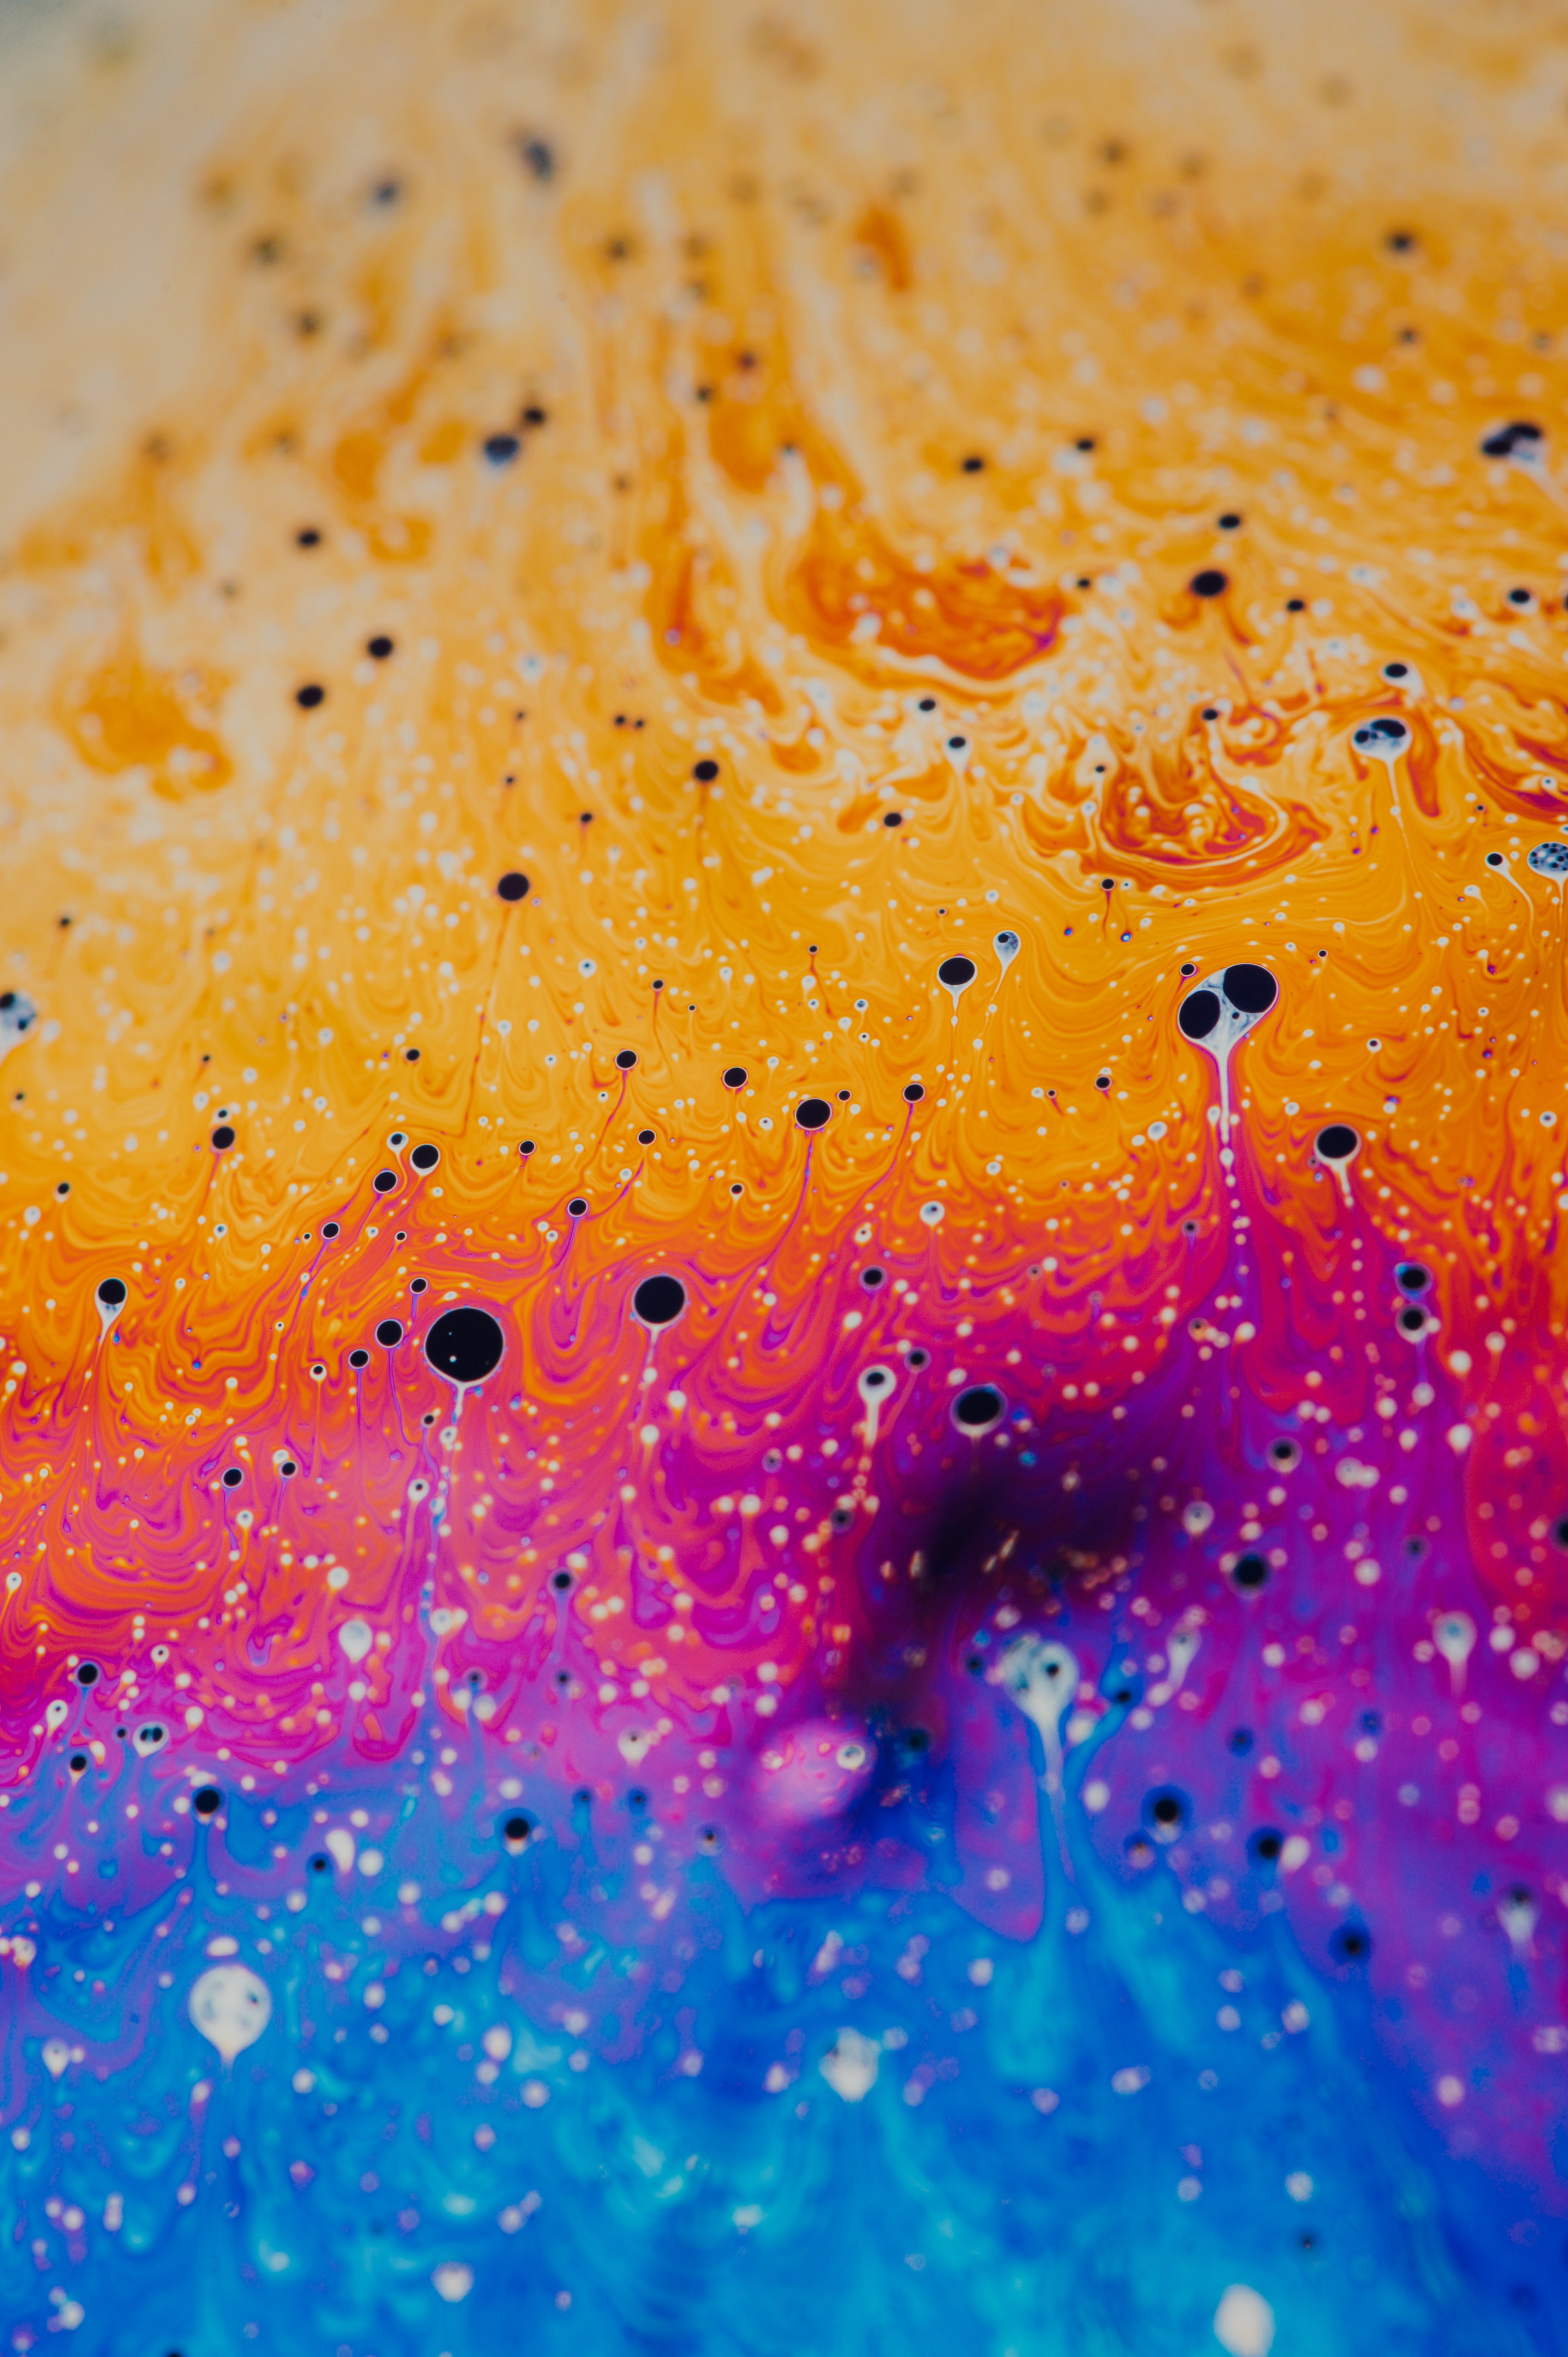 stains, multicolored, abstract, motley, paint, liquid, spots FHD, 4K, UHD